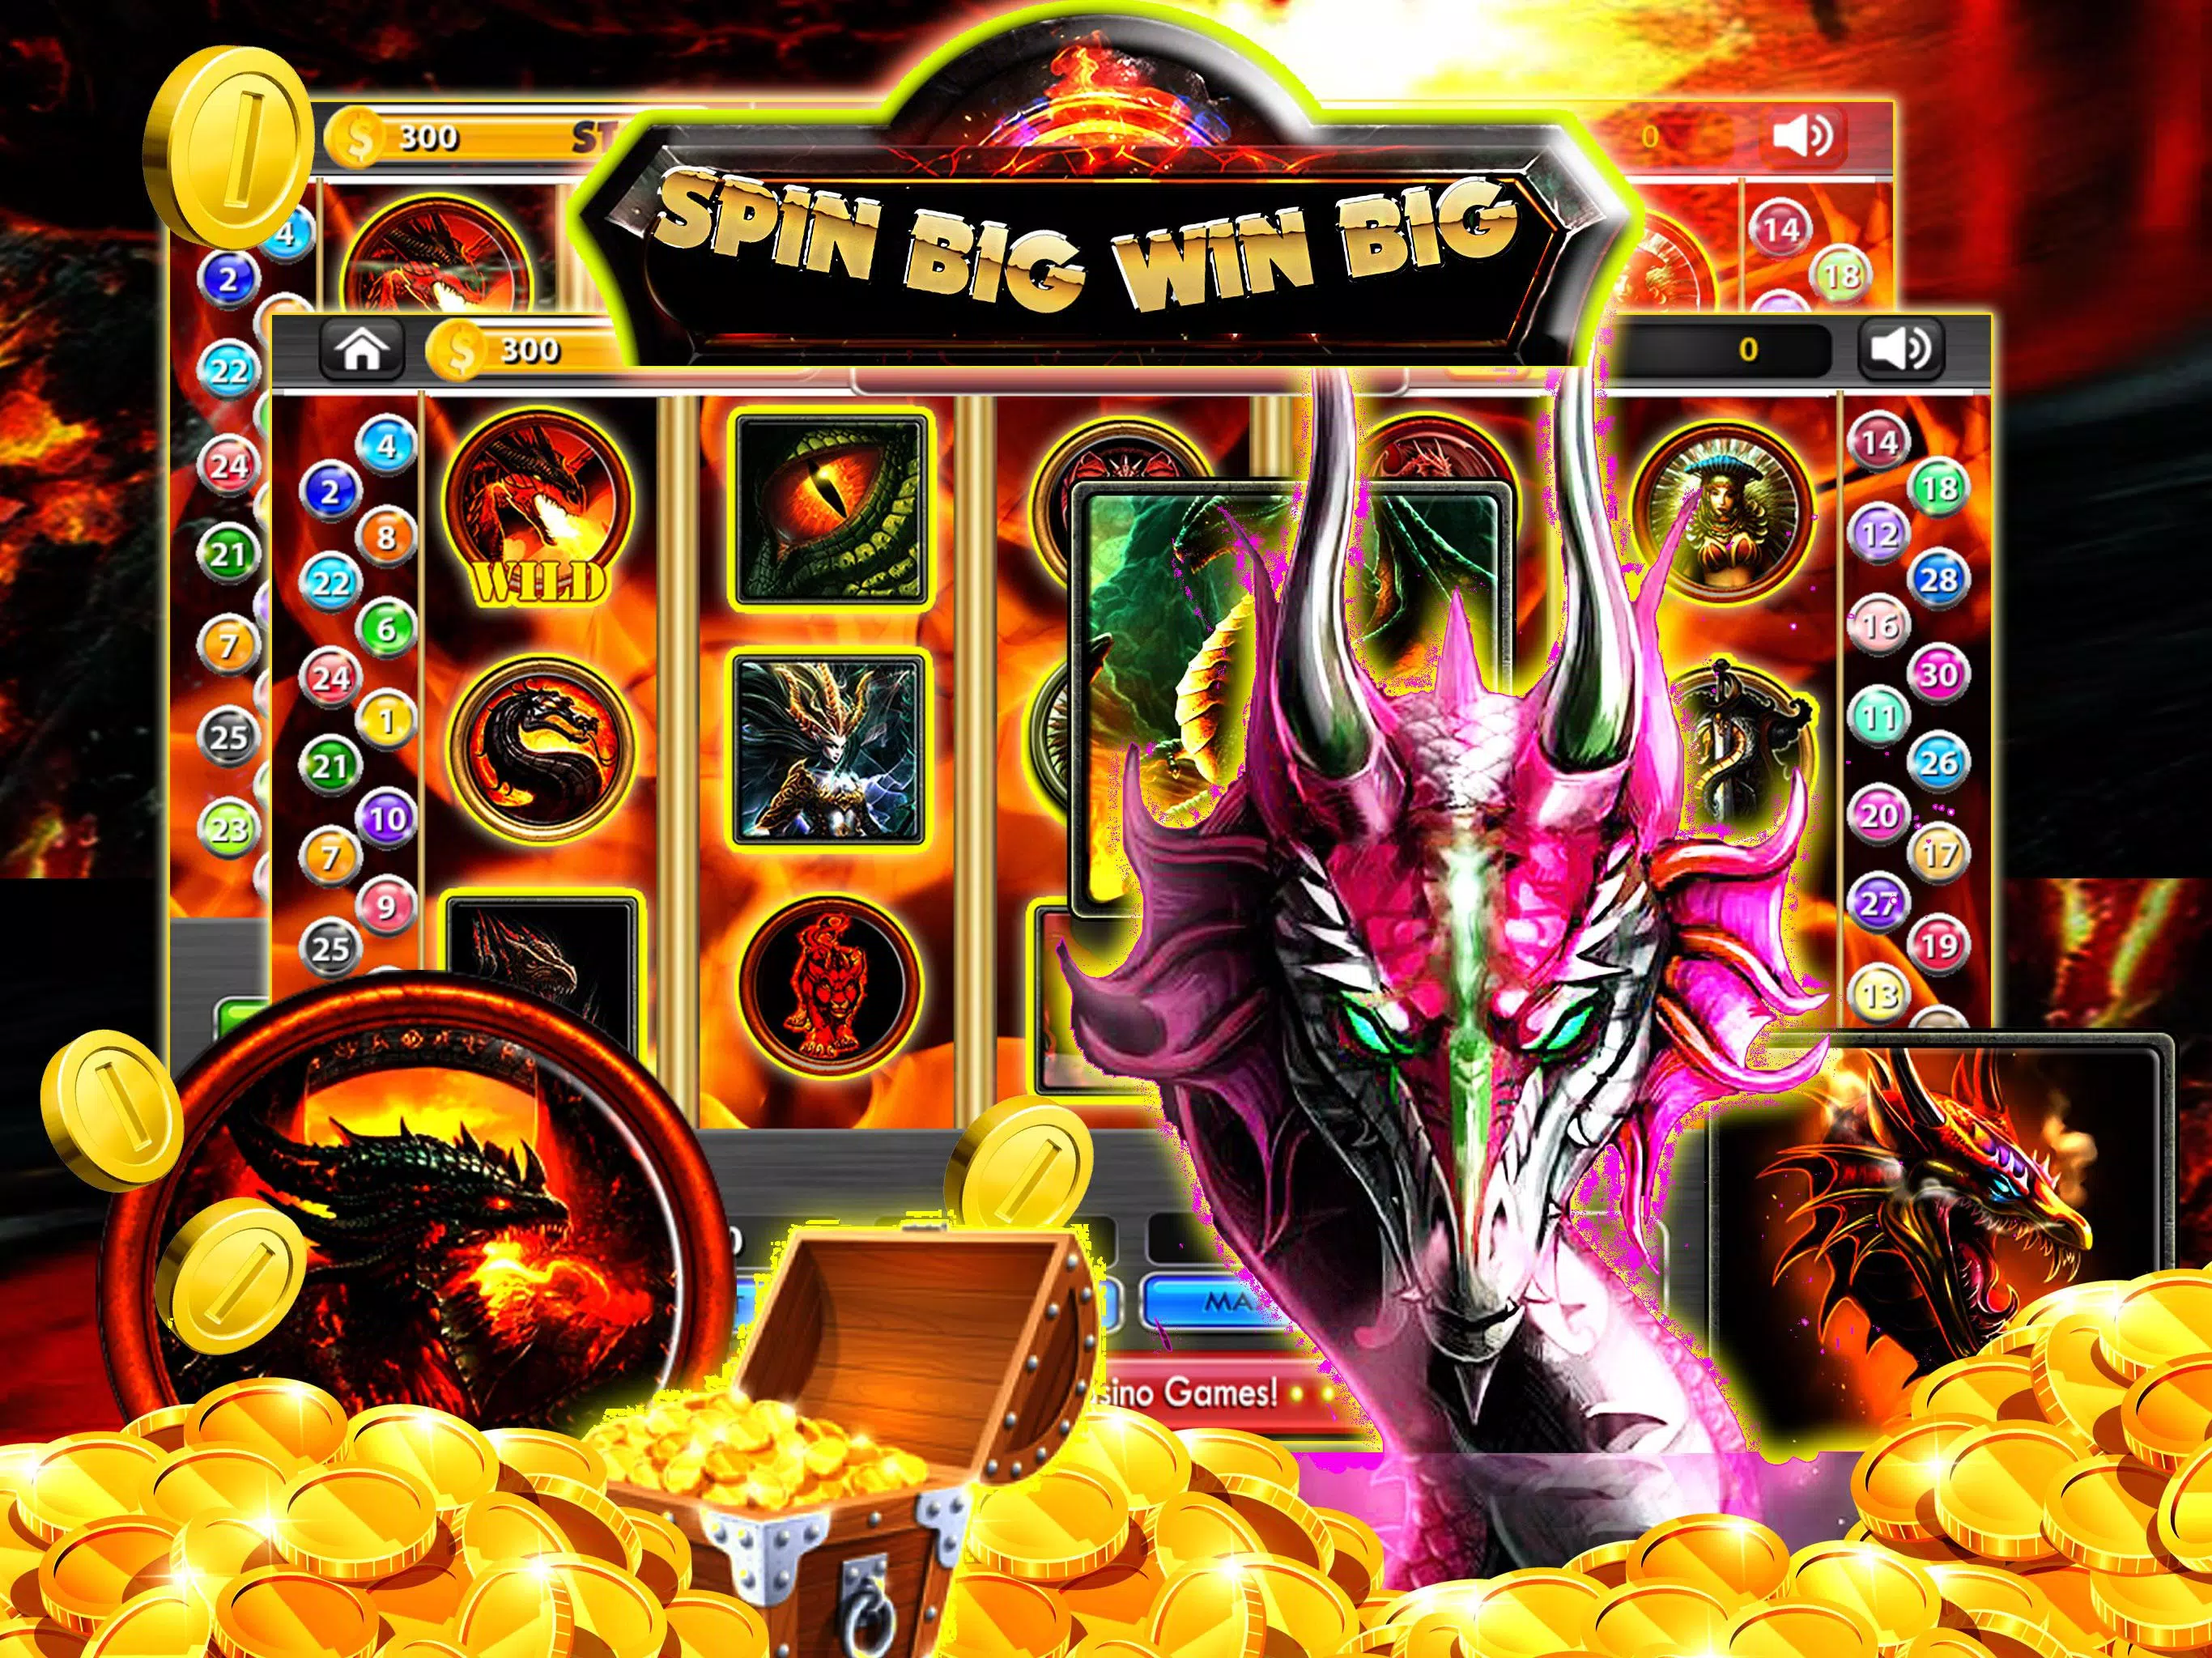 Golden dragon: fairytale slots, free coins, 888 Apk Download for Android-  Latest version 8- gambino.dragonsgold